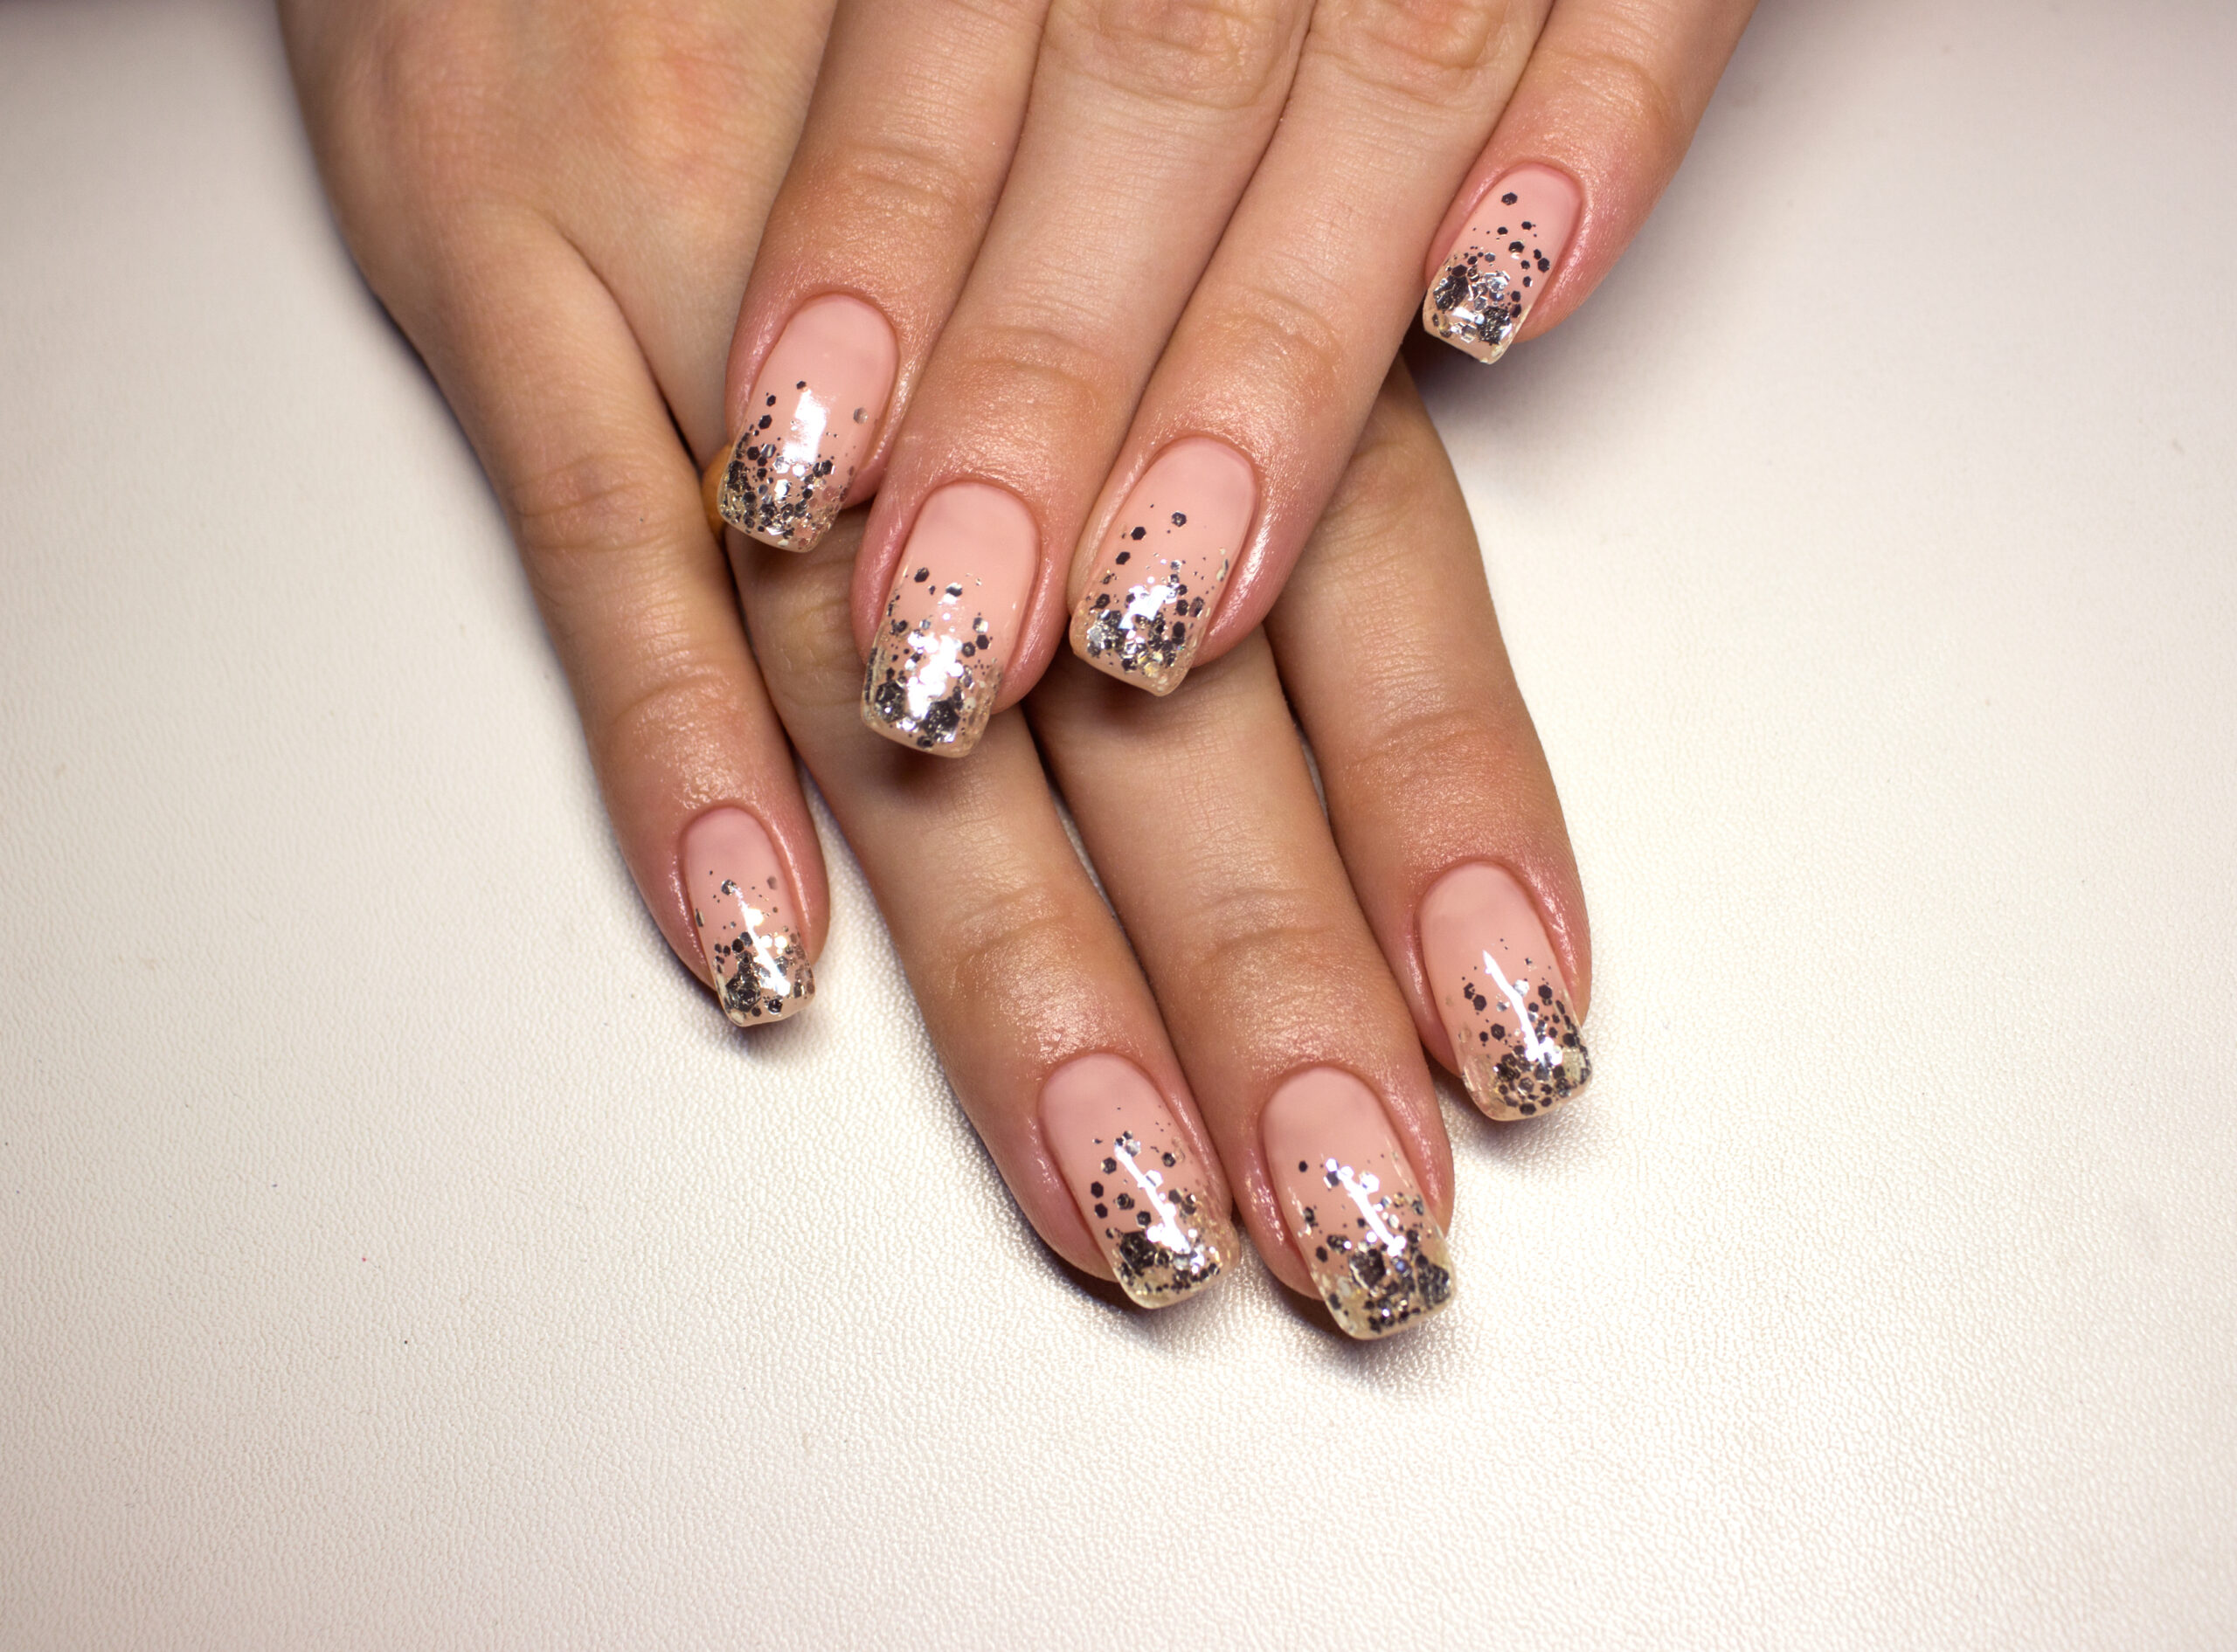 Nail art with silver details